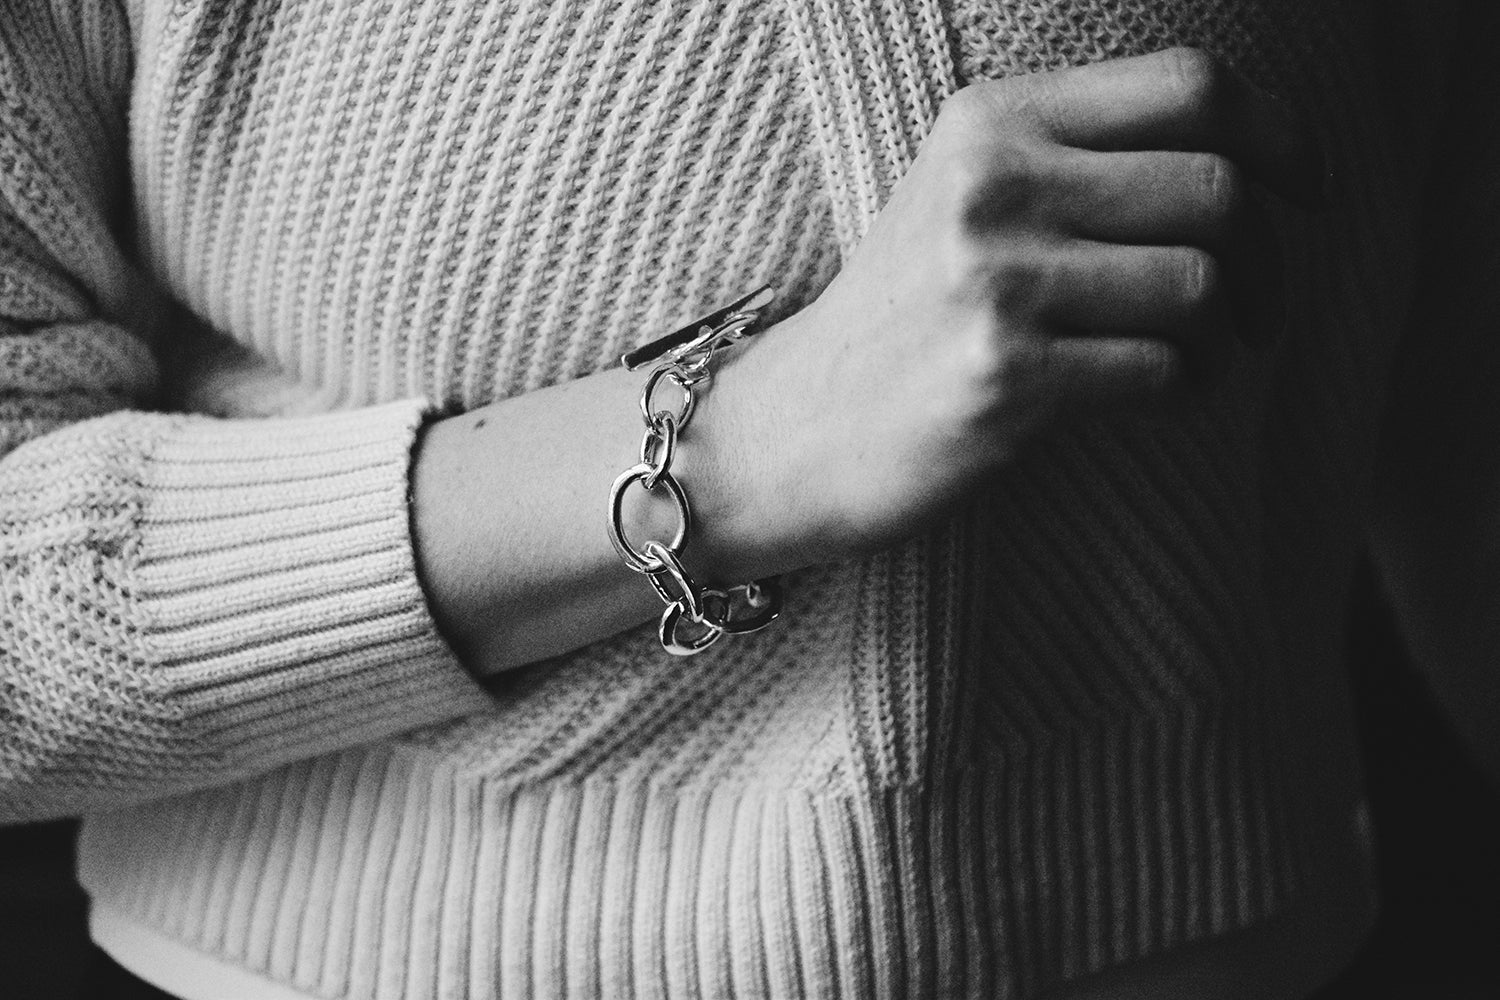 The Alana Bracelet on a model for scale. Image shows the organic, variable sterling silver links, as well as the statement toggle.